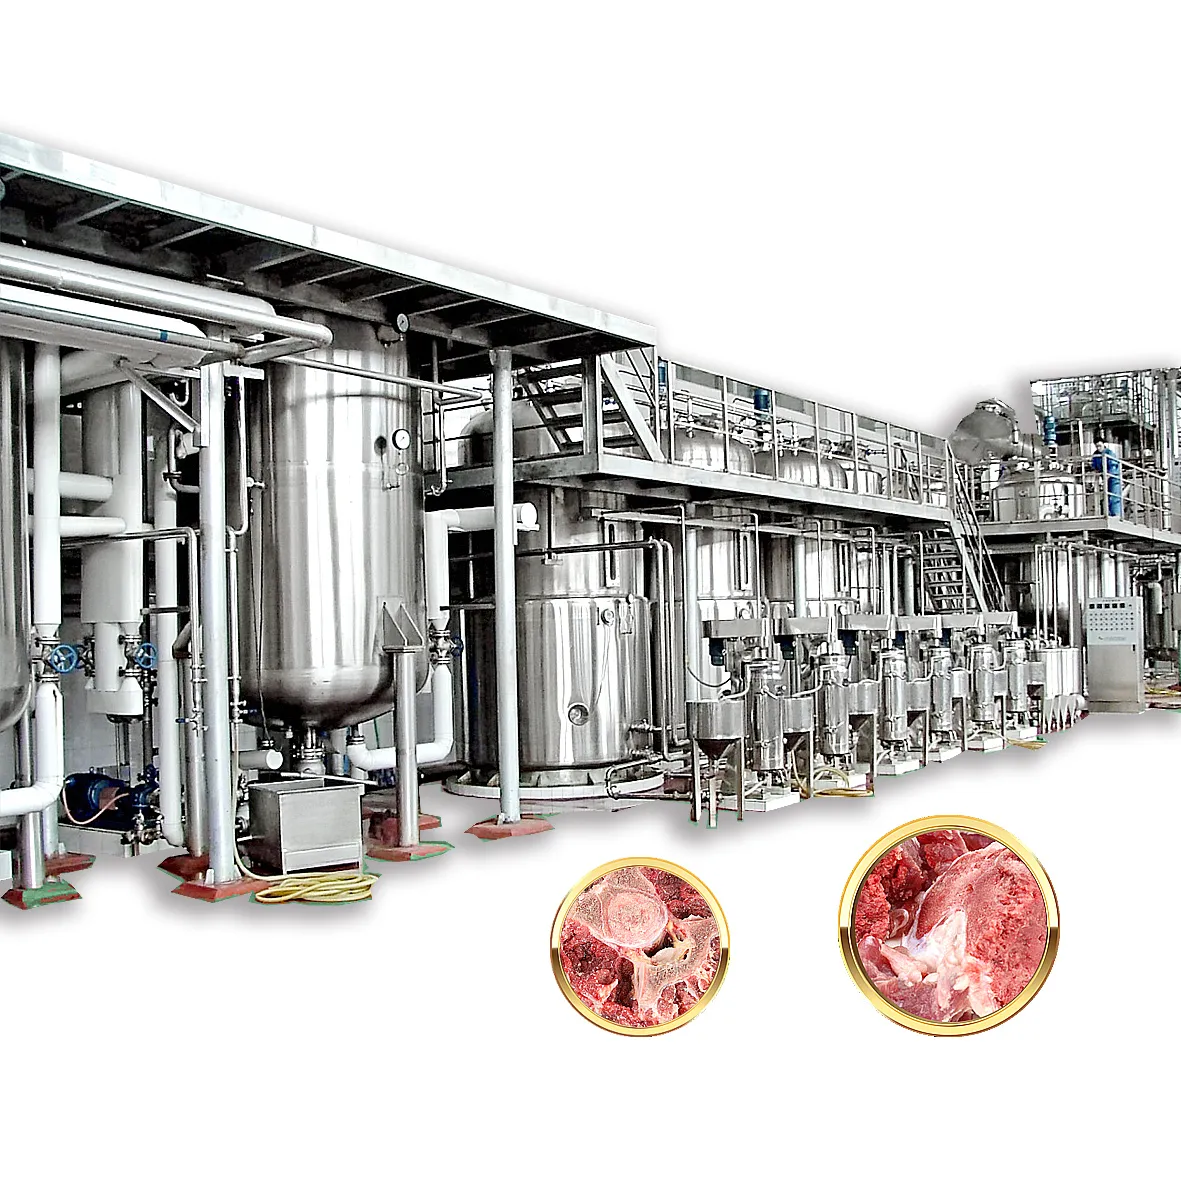 Meat processing plant equipment